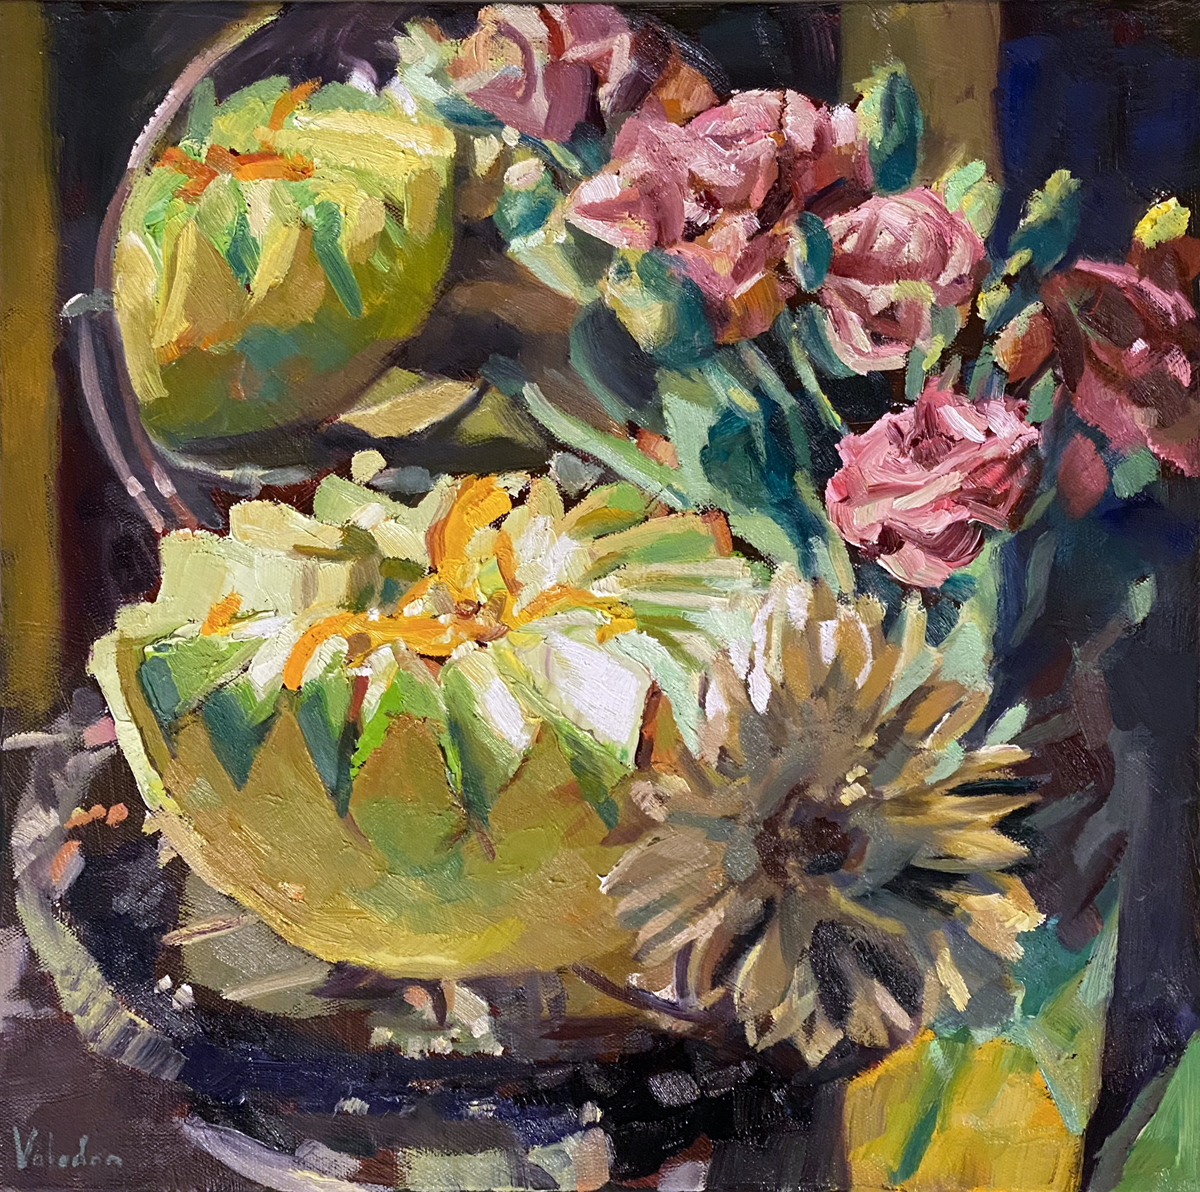 Rosemary Valadon 'Honeydew and Roses' oil on canvas 40 x 40 $4,500